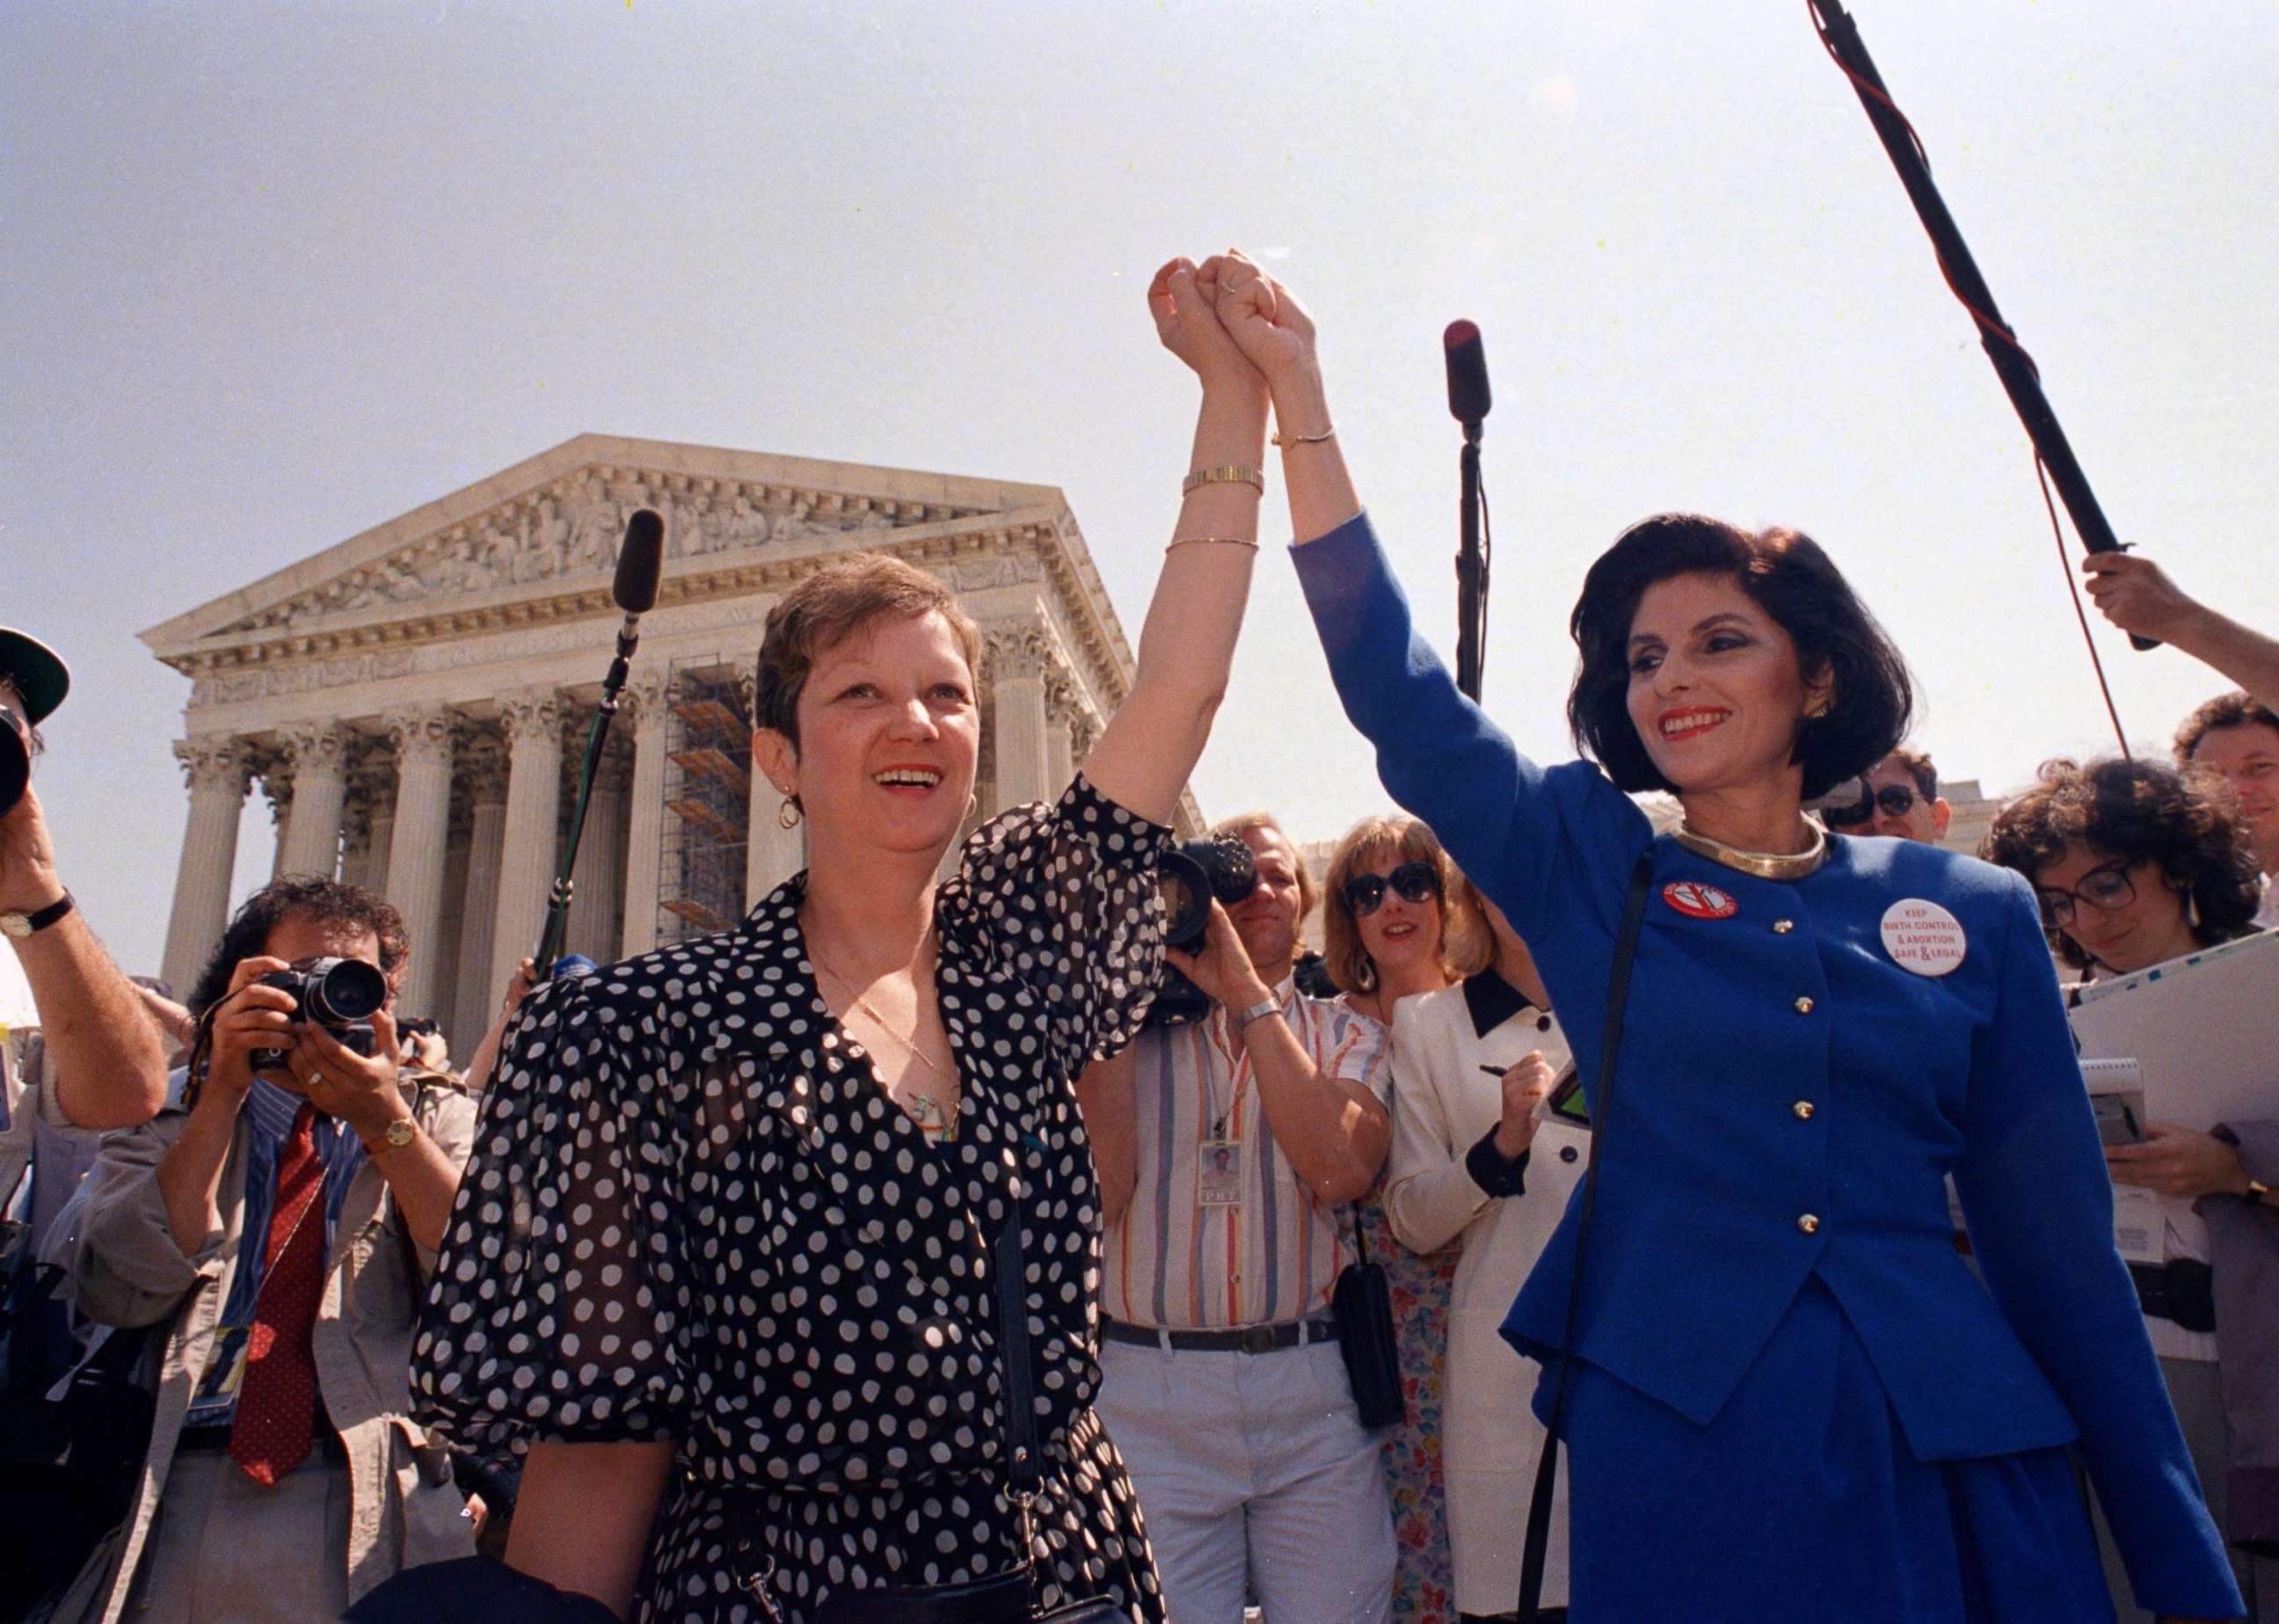 PHOTO: Norma McCorvey,left, known as Jane Roe in the 1973 Supreme Court case, with her attorney Gloria Allred as they leave the Supreme Court building after sitting in while the court listened to arguments in a Missouri abortion case, April 26, 1989.